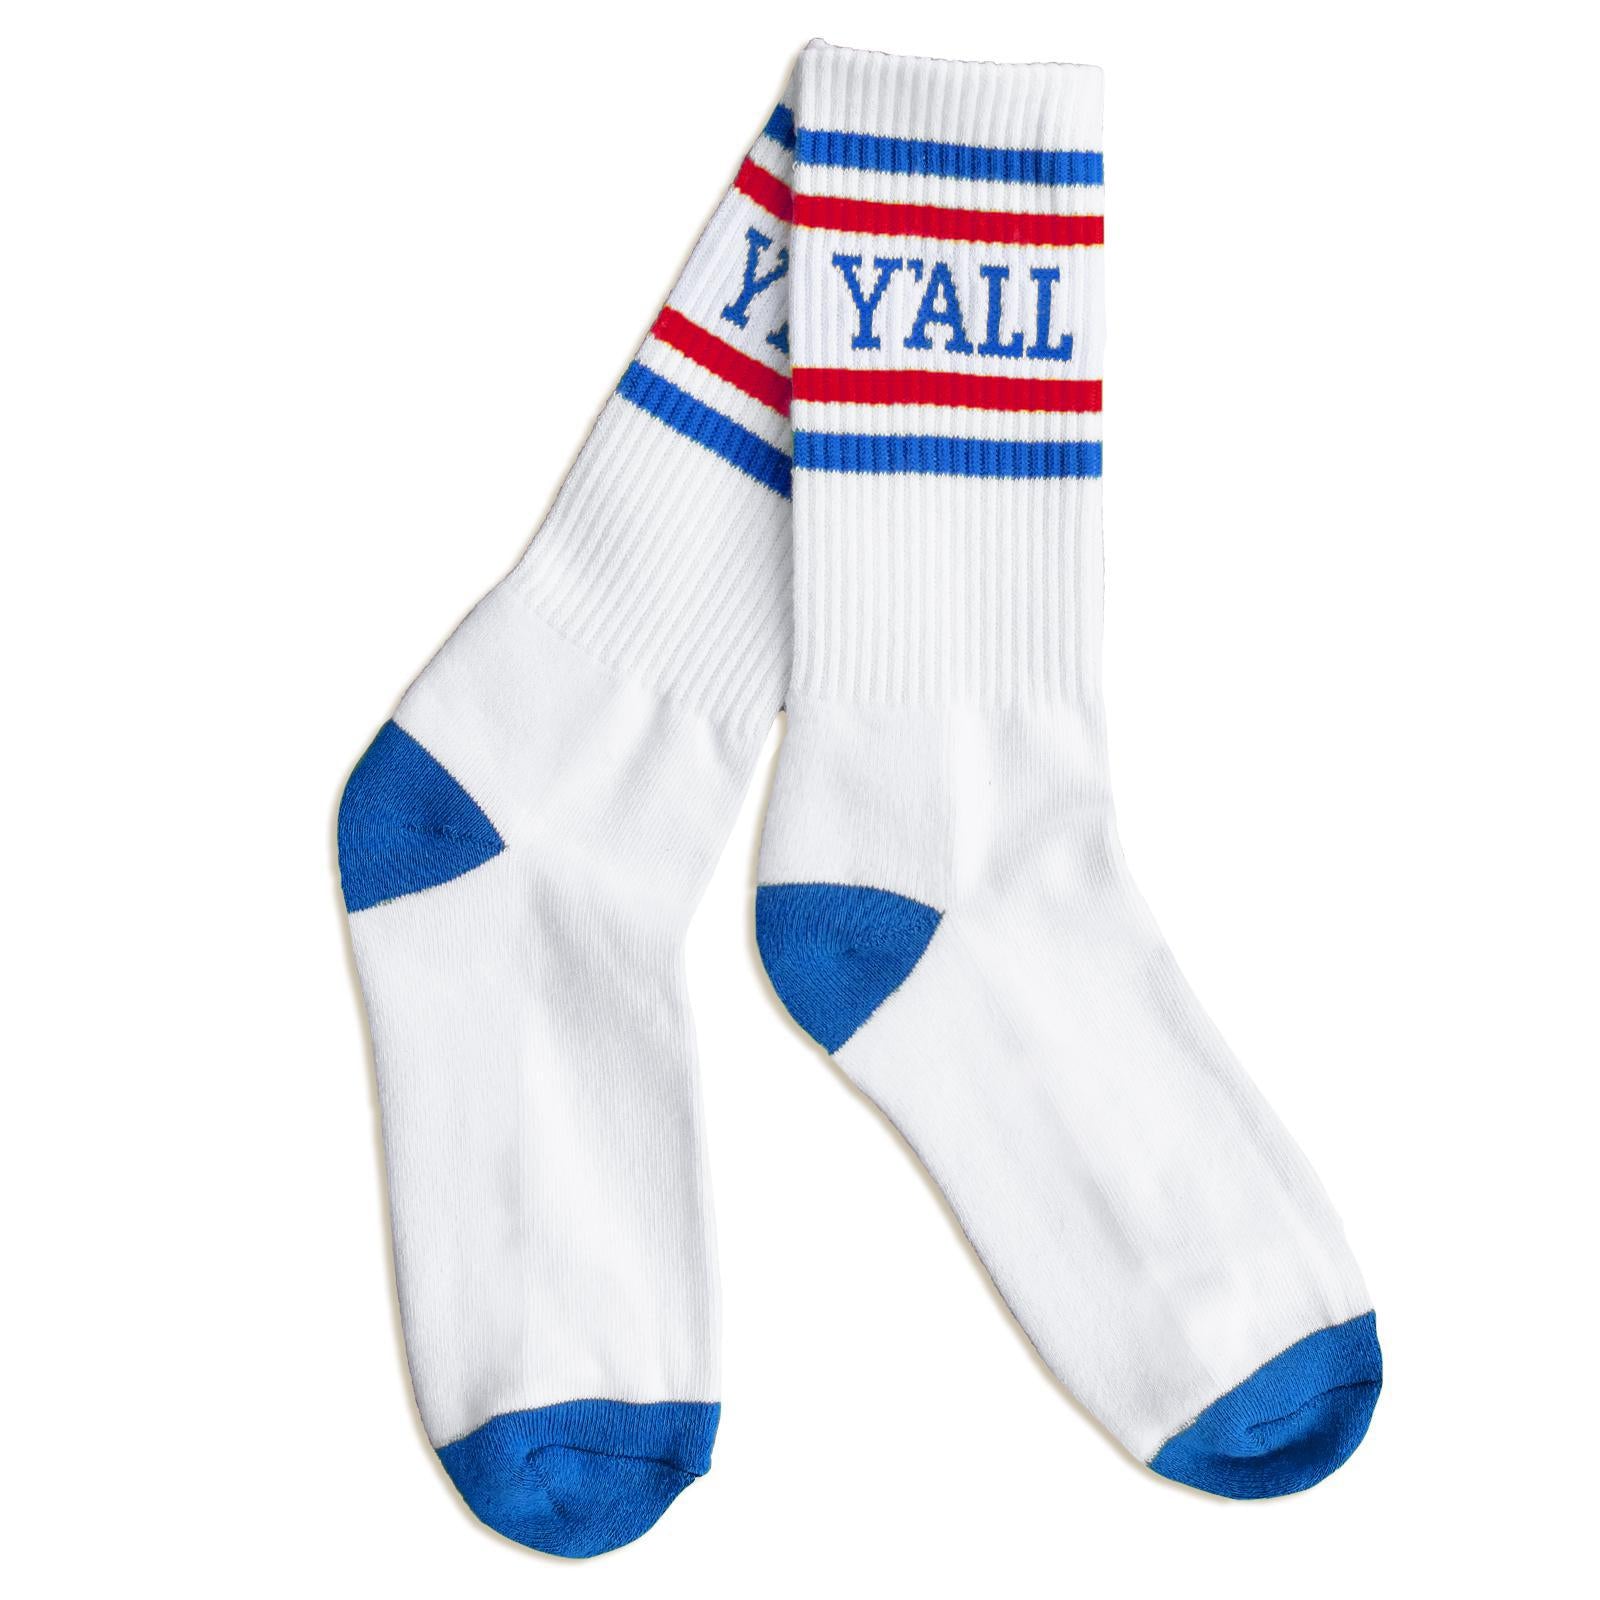 Y'all Stripe Sock (Royal & Red)-Socks-KY for KY Store